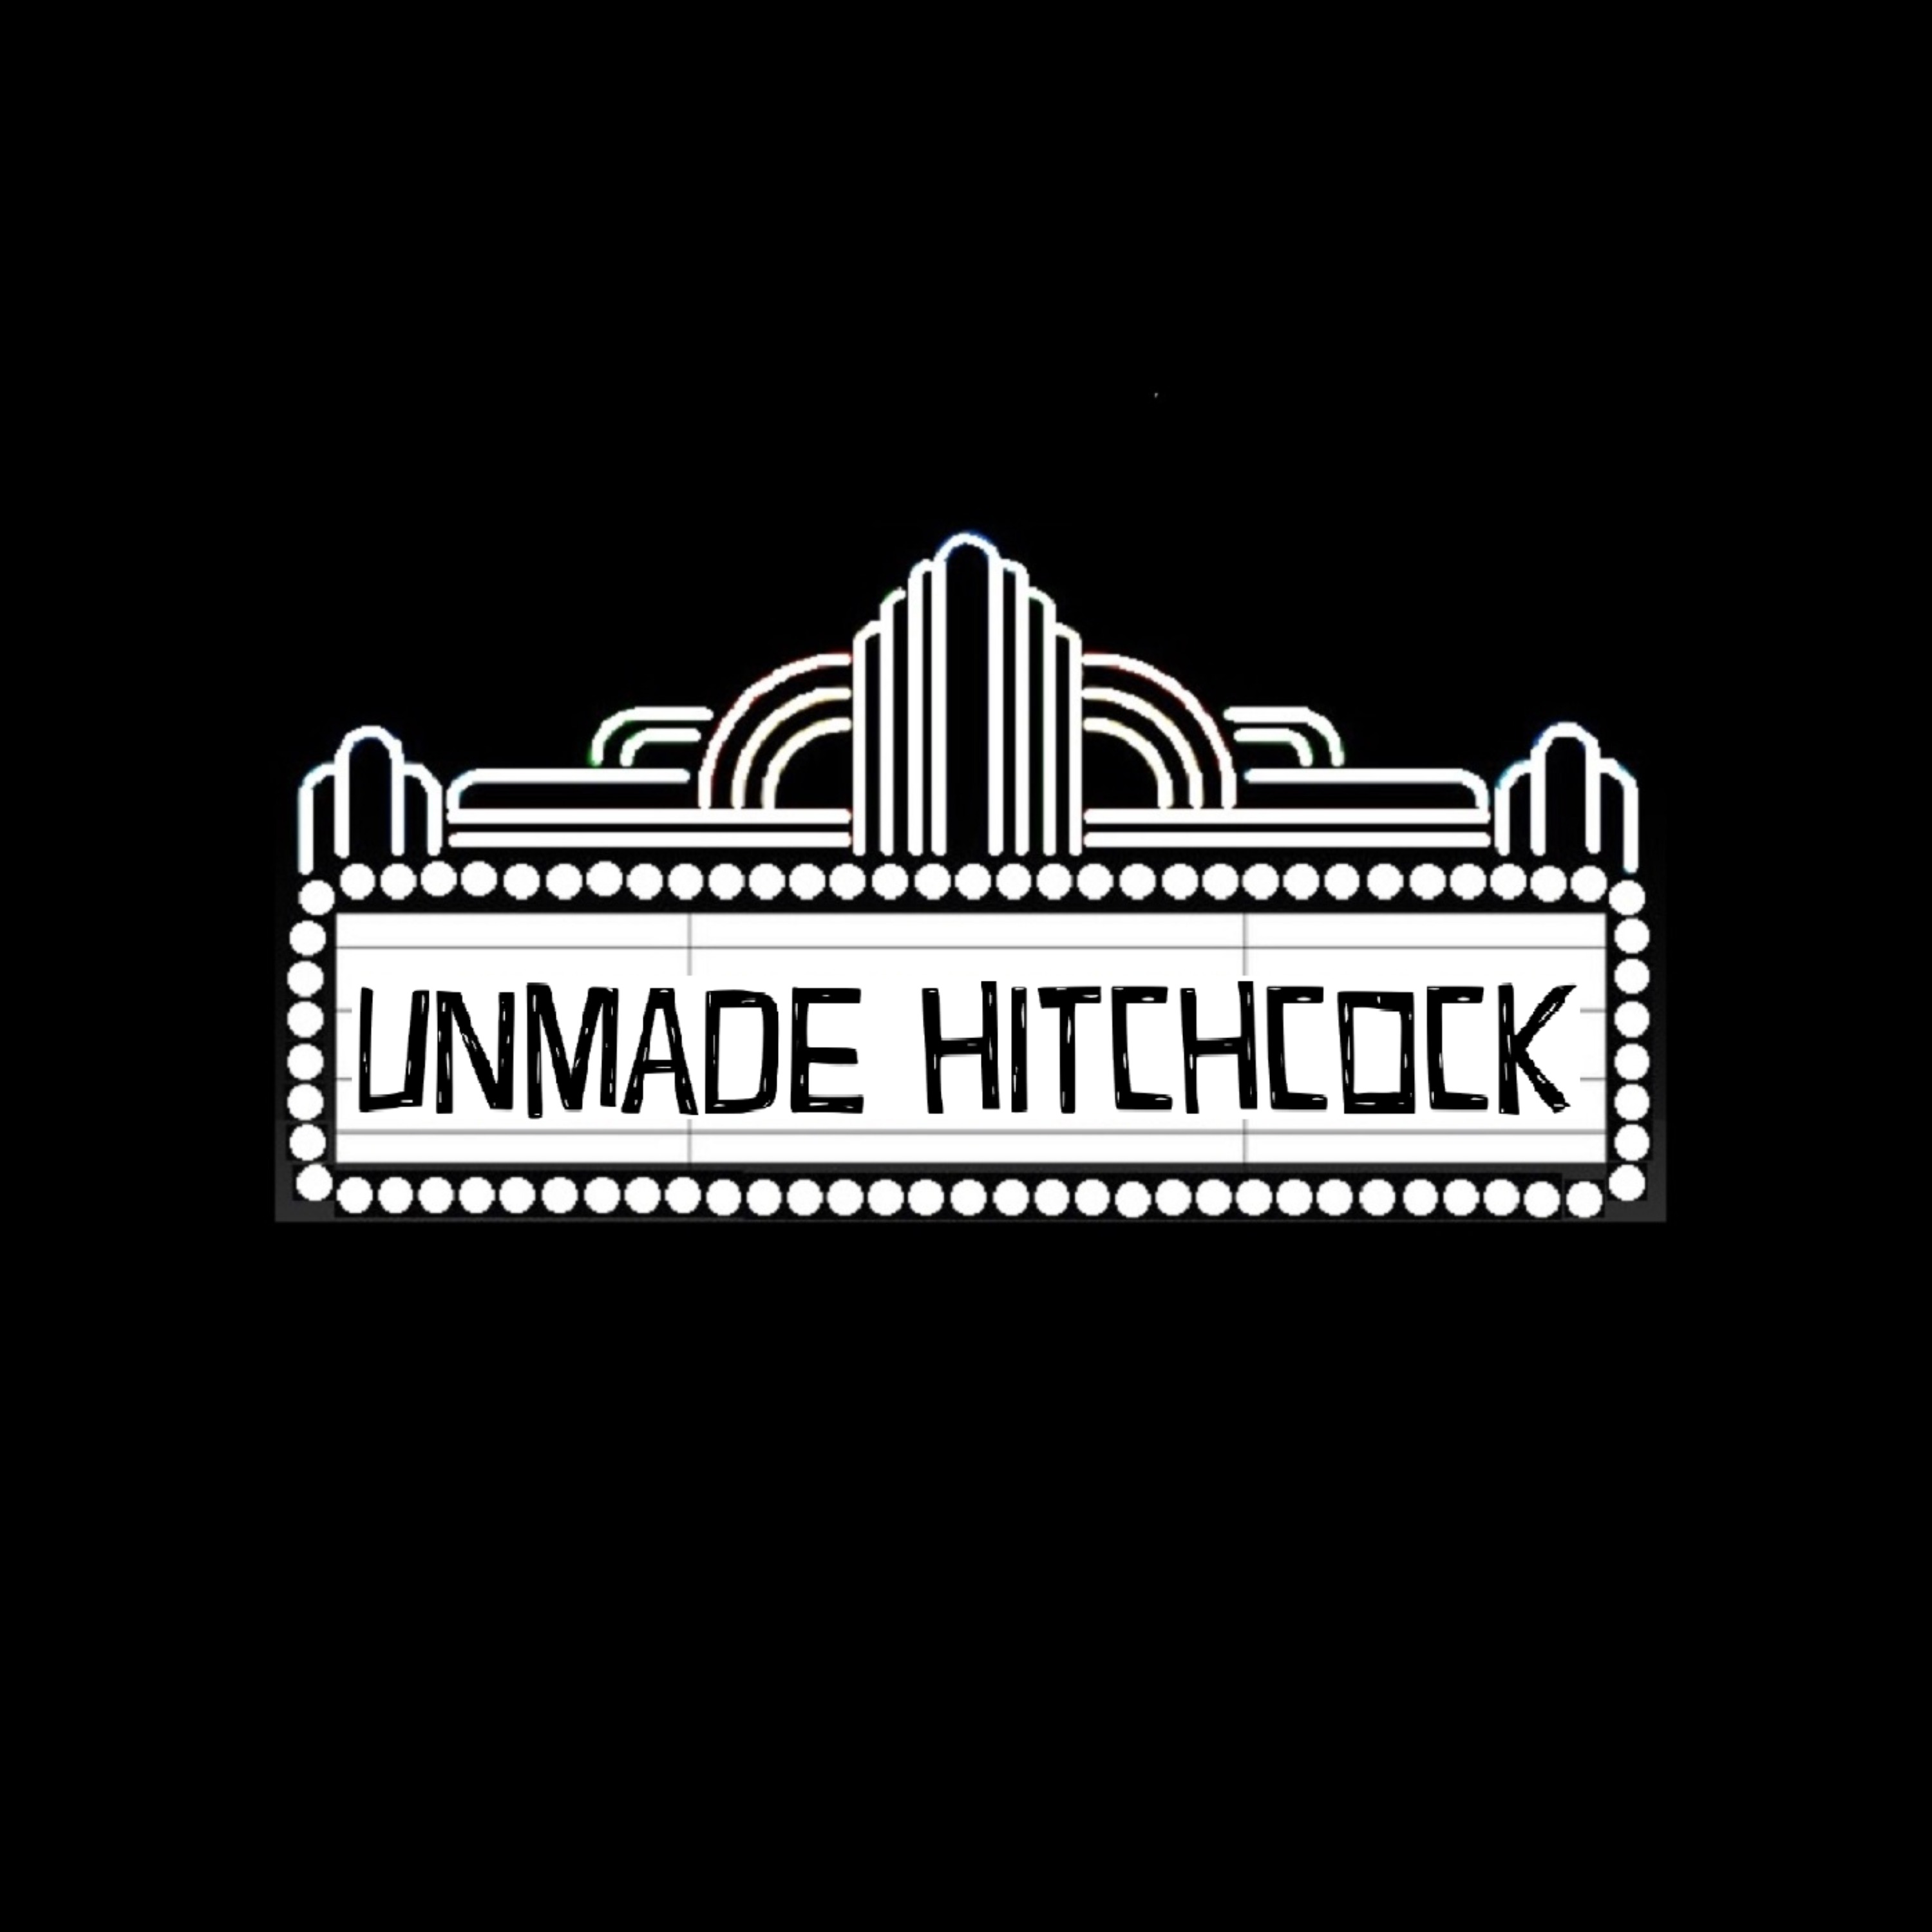 Unmade Hitchcock